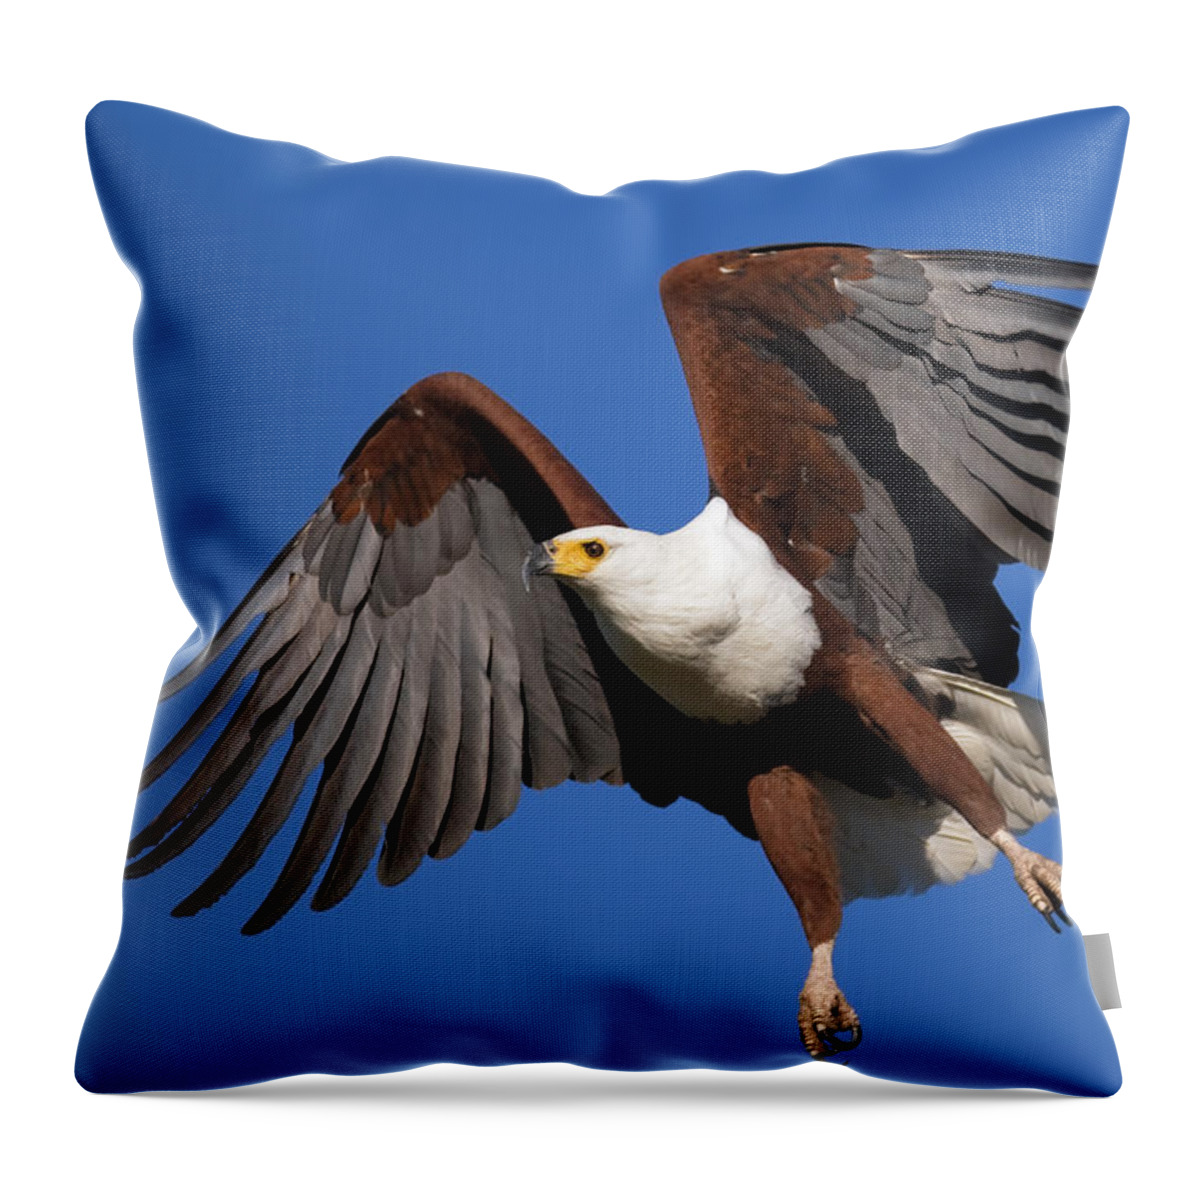 Eagle Throw Pillow featuring the photograph African Fish Eagle by Johan Swanepoel